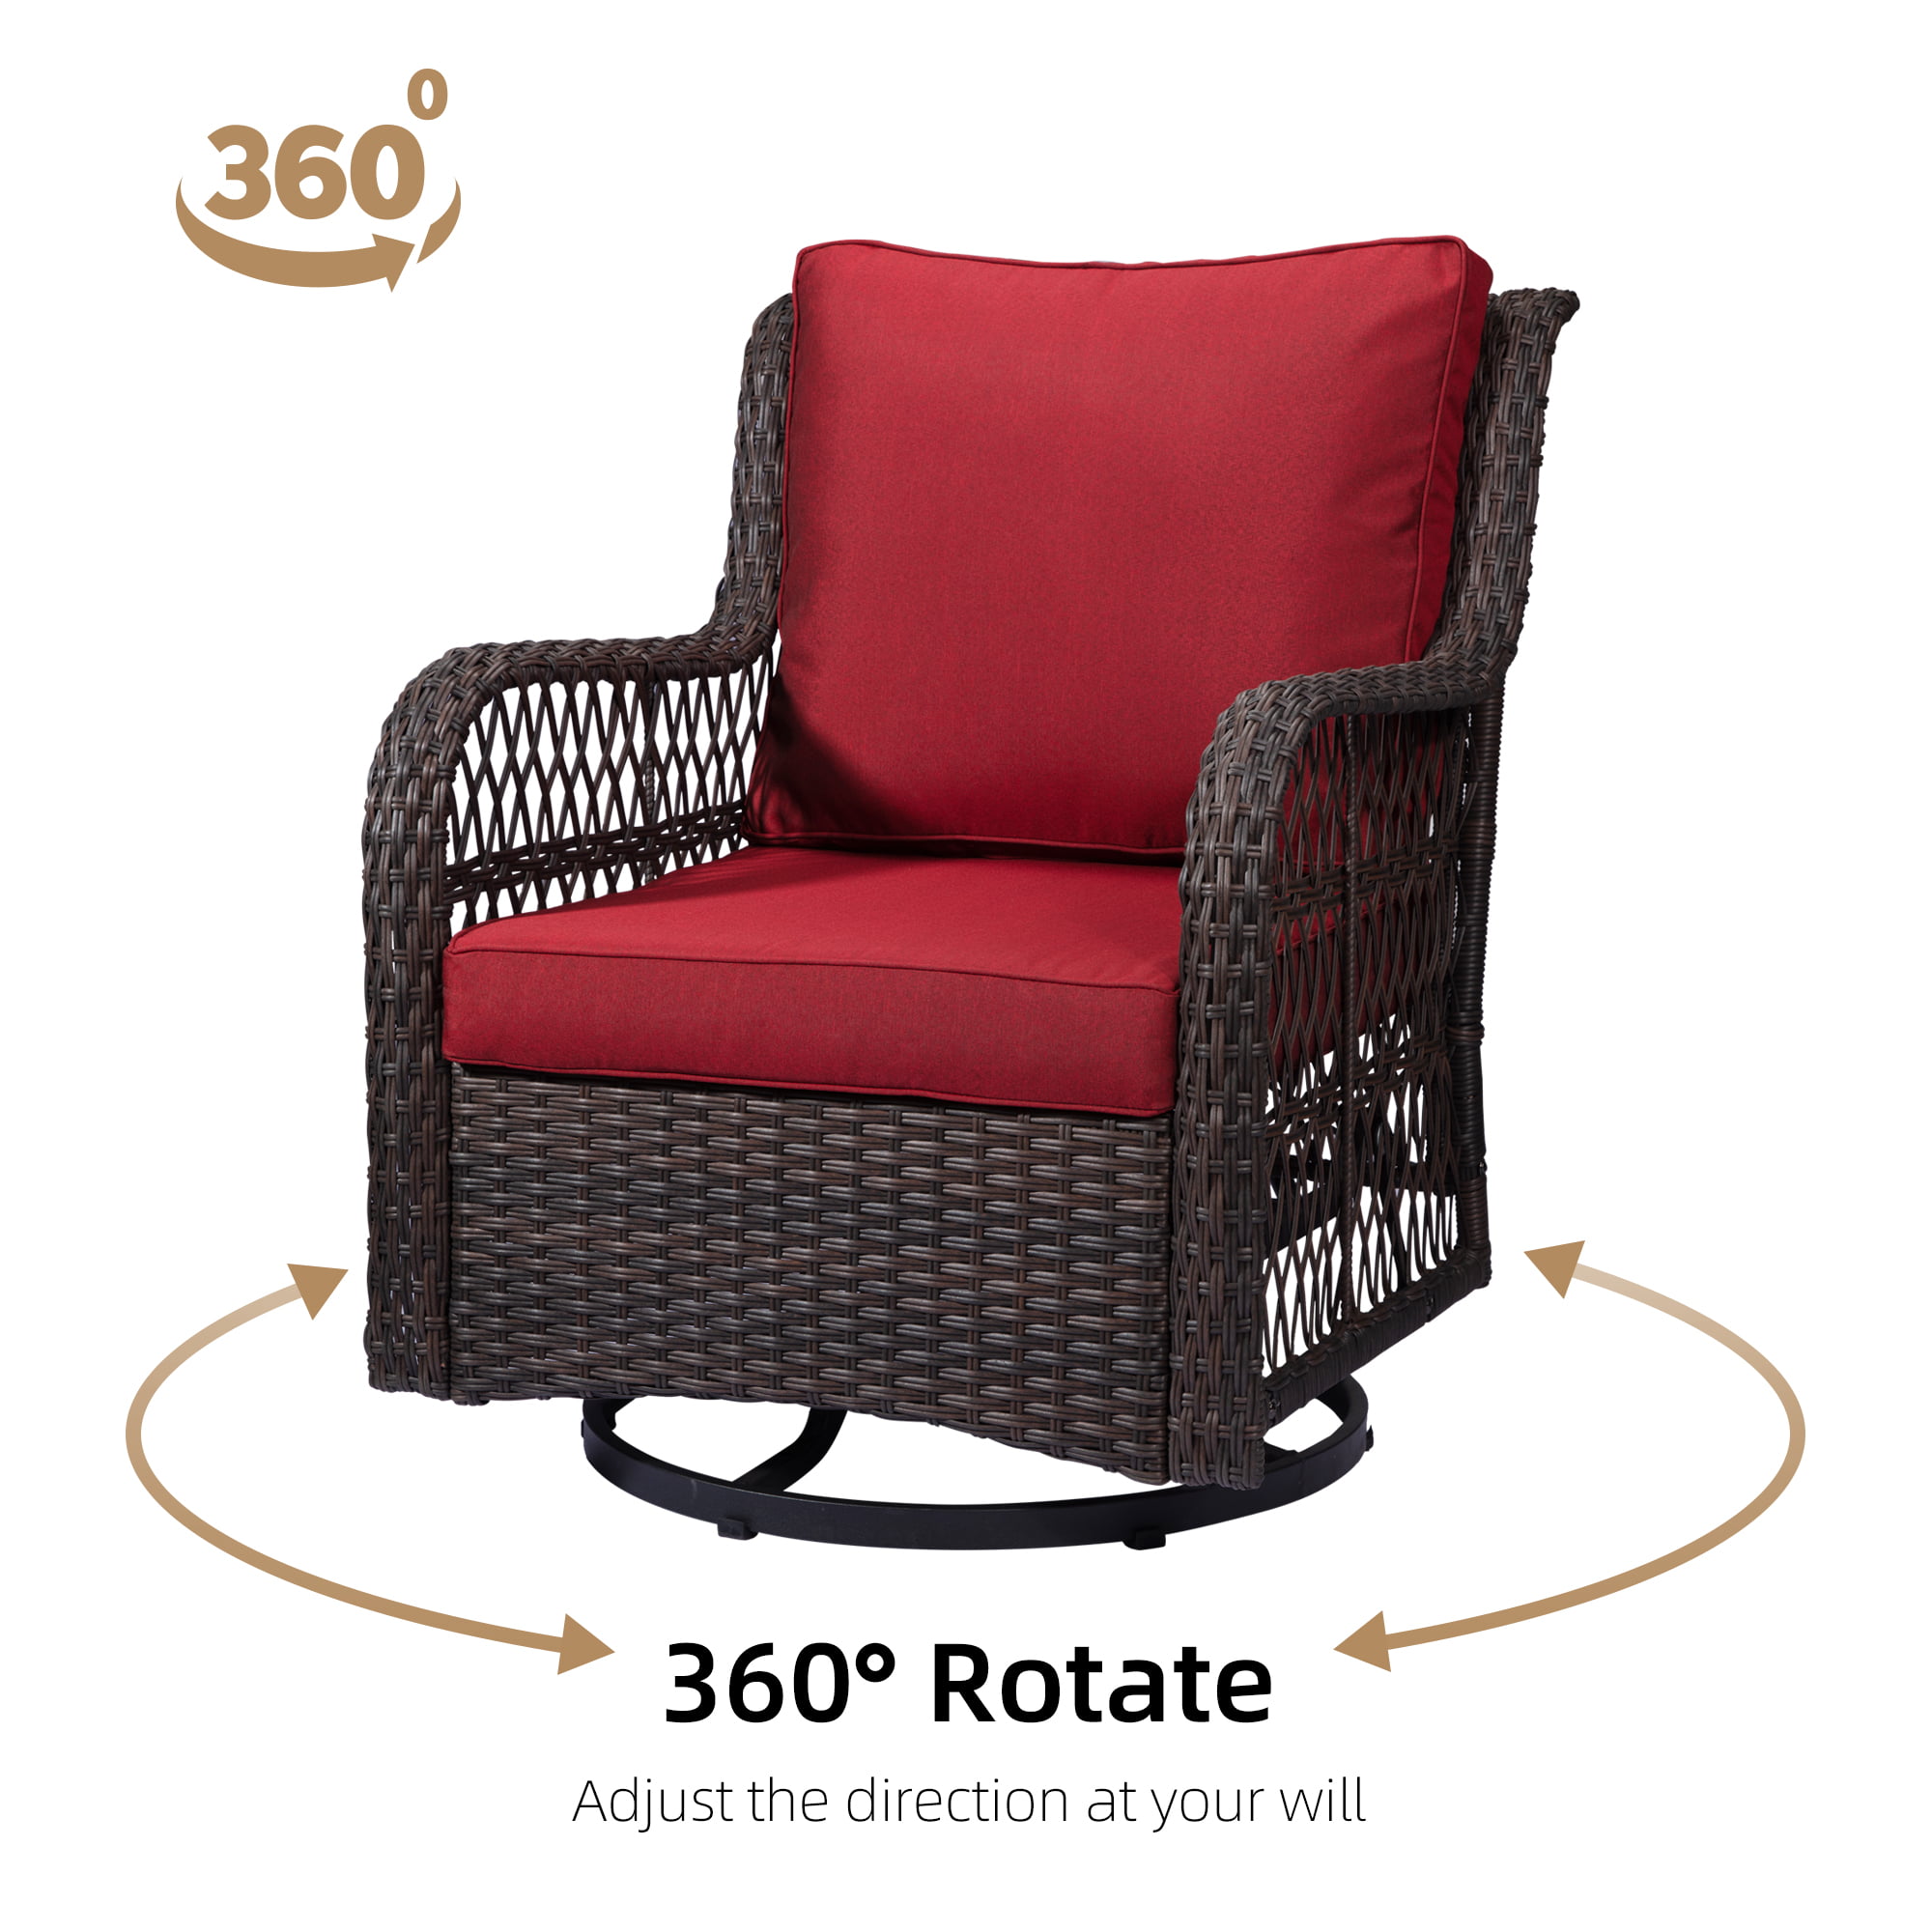 3 Pieces Outdoor Swivel Rocker Patio Chairs Set with Cushion,2PCS 360° Swivel Rocking Patio Chairs and 1PC Matching Side Table for Outside Backyard Garden Rust Red - image 2 of 7